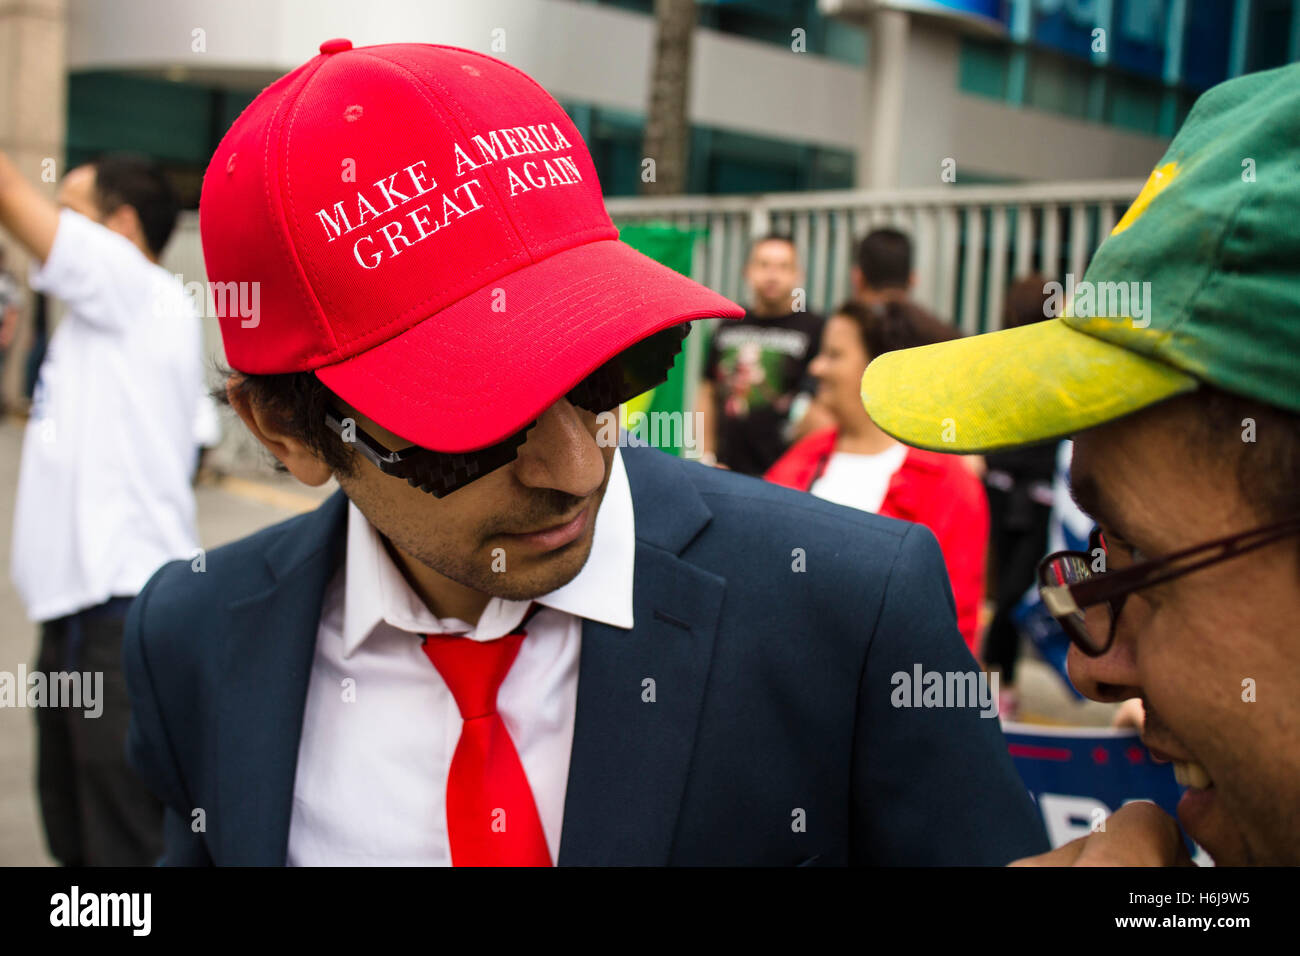 Sao Paulo, Brazil - October 29, 2016, A group of Donald Trump supporters gathered for a Pro-Trump rally on Paulista Avenue in Sao Paulo Brazil. Stock Photo